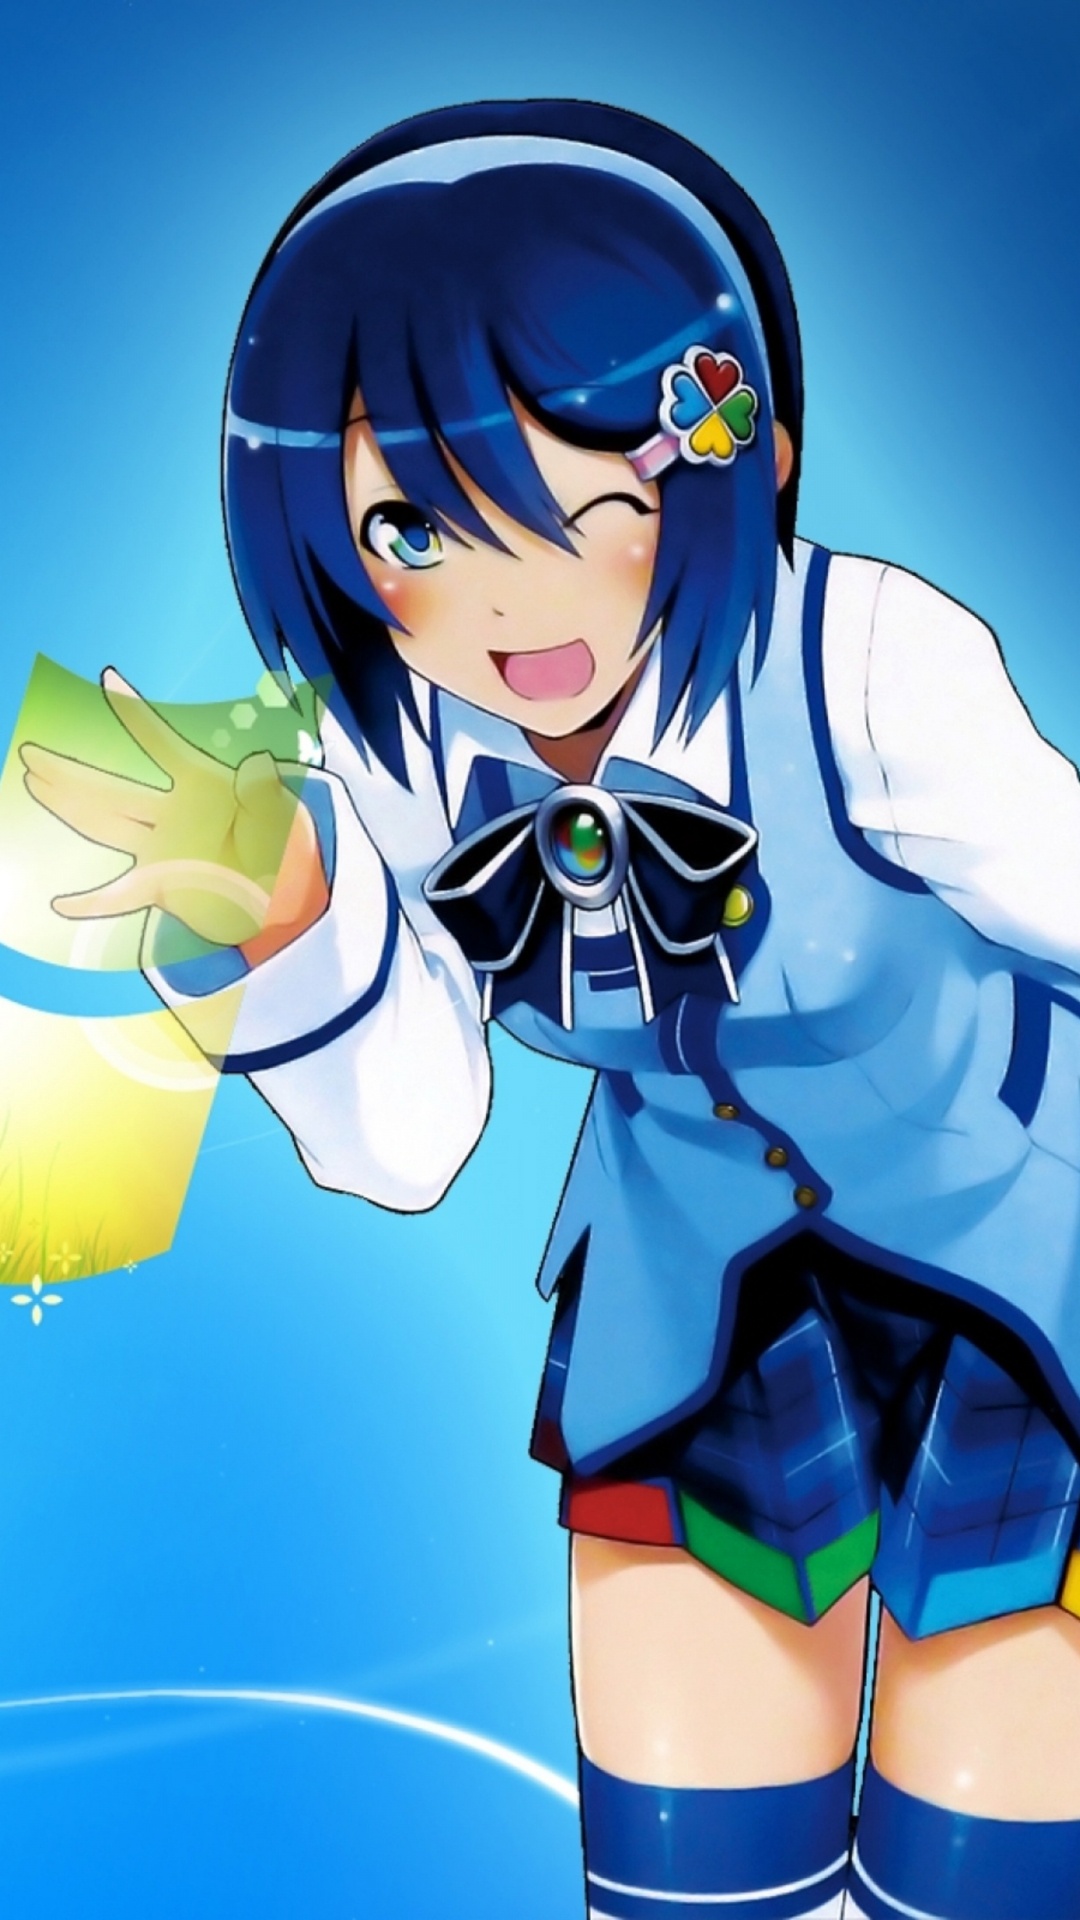 Woman in Blue and White School Uniform Anime Character. Wallpaper in 1080x1920 Resolution